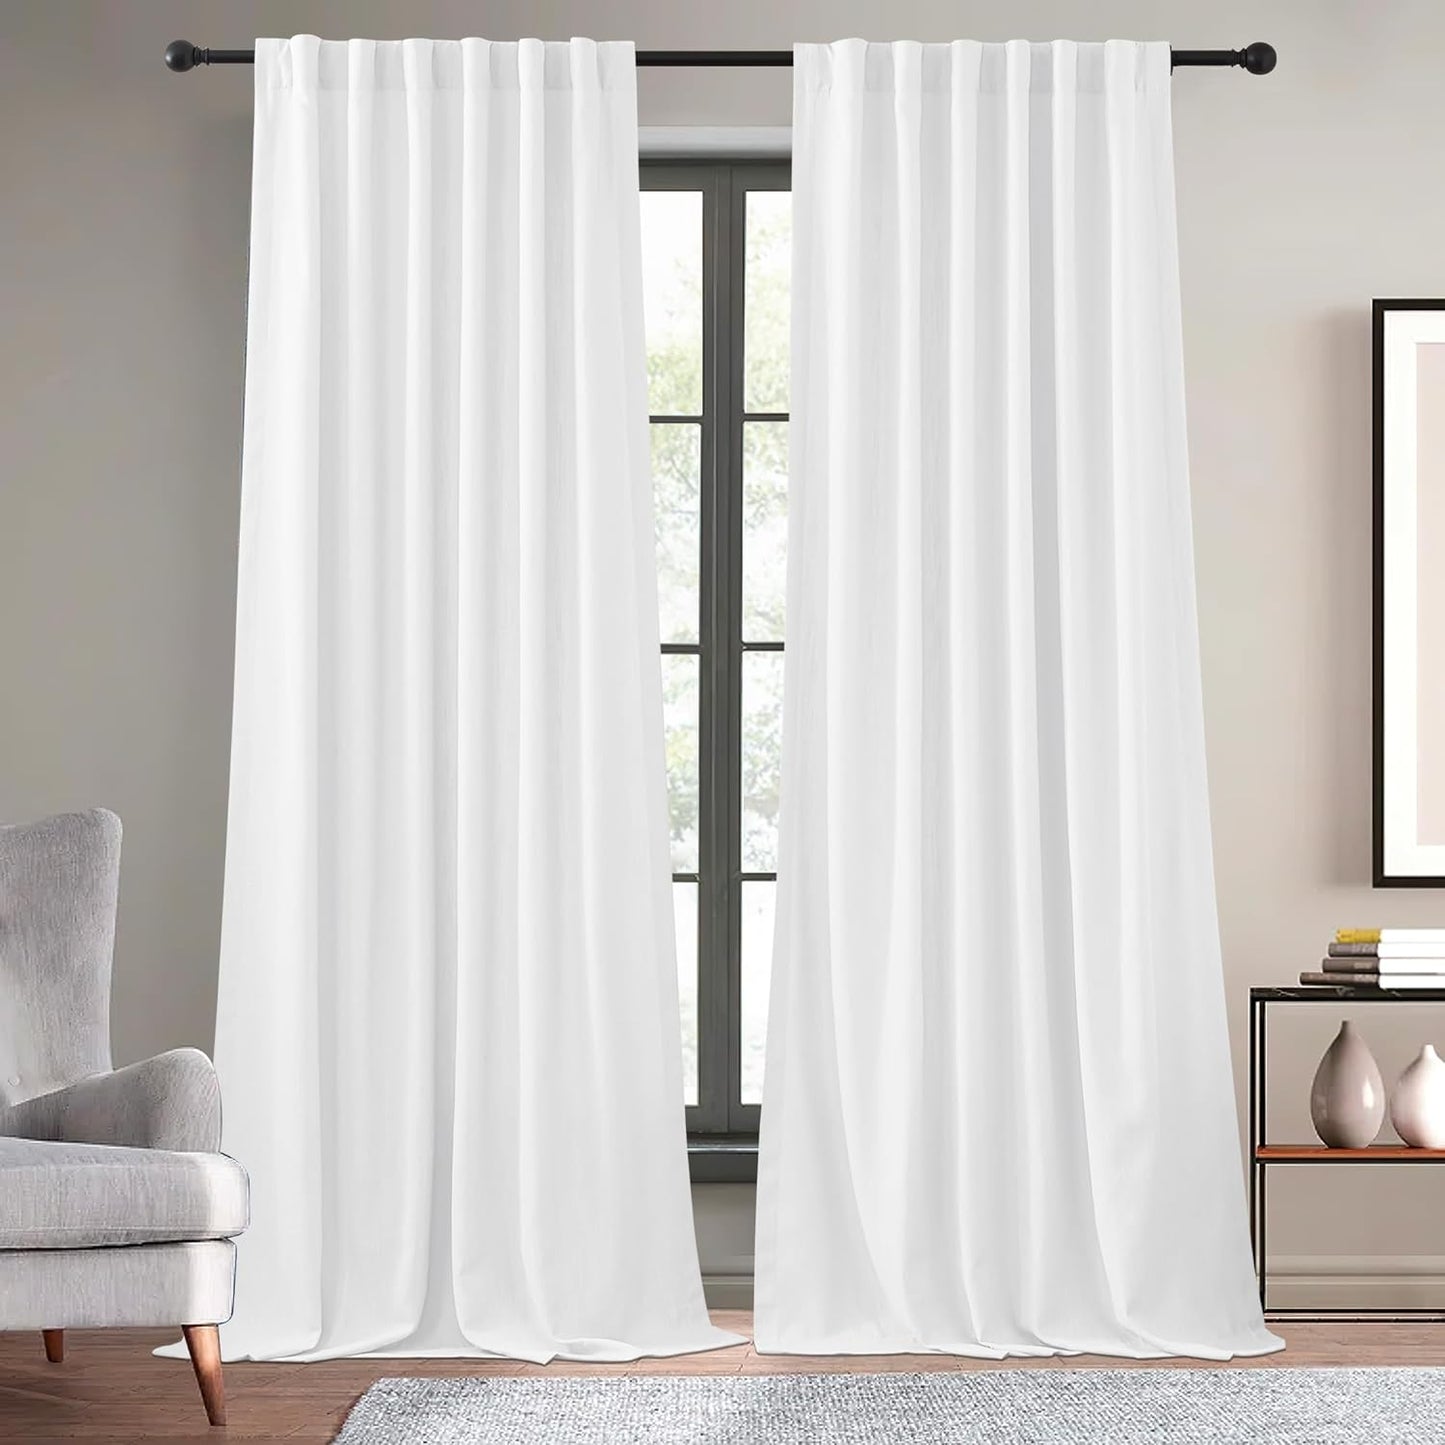 KGORGE Thick Faux Linen Weave Textured Curtains for Bedroom Light Filtering Semi Sheer Curtains Farmhouse Decor Pinch Pleated Window Drapes for Living Room, Linen, W 52" X L 96", 2 Pcs  KGORGE Pure White W 52 X L 96 | Pair 